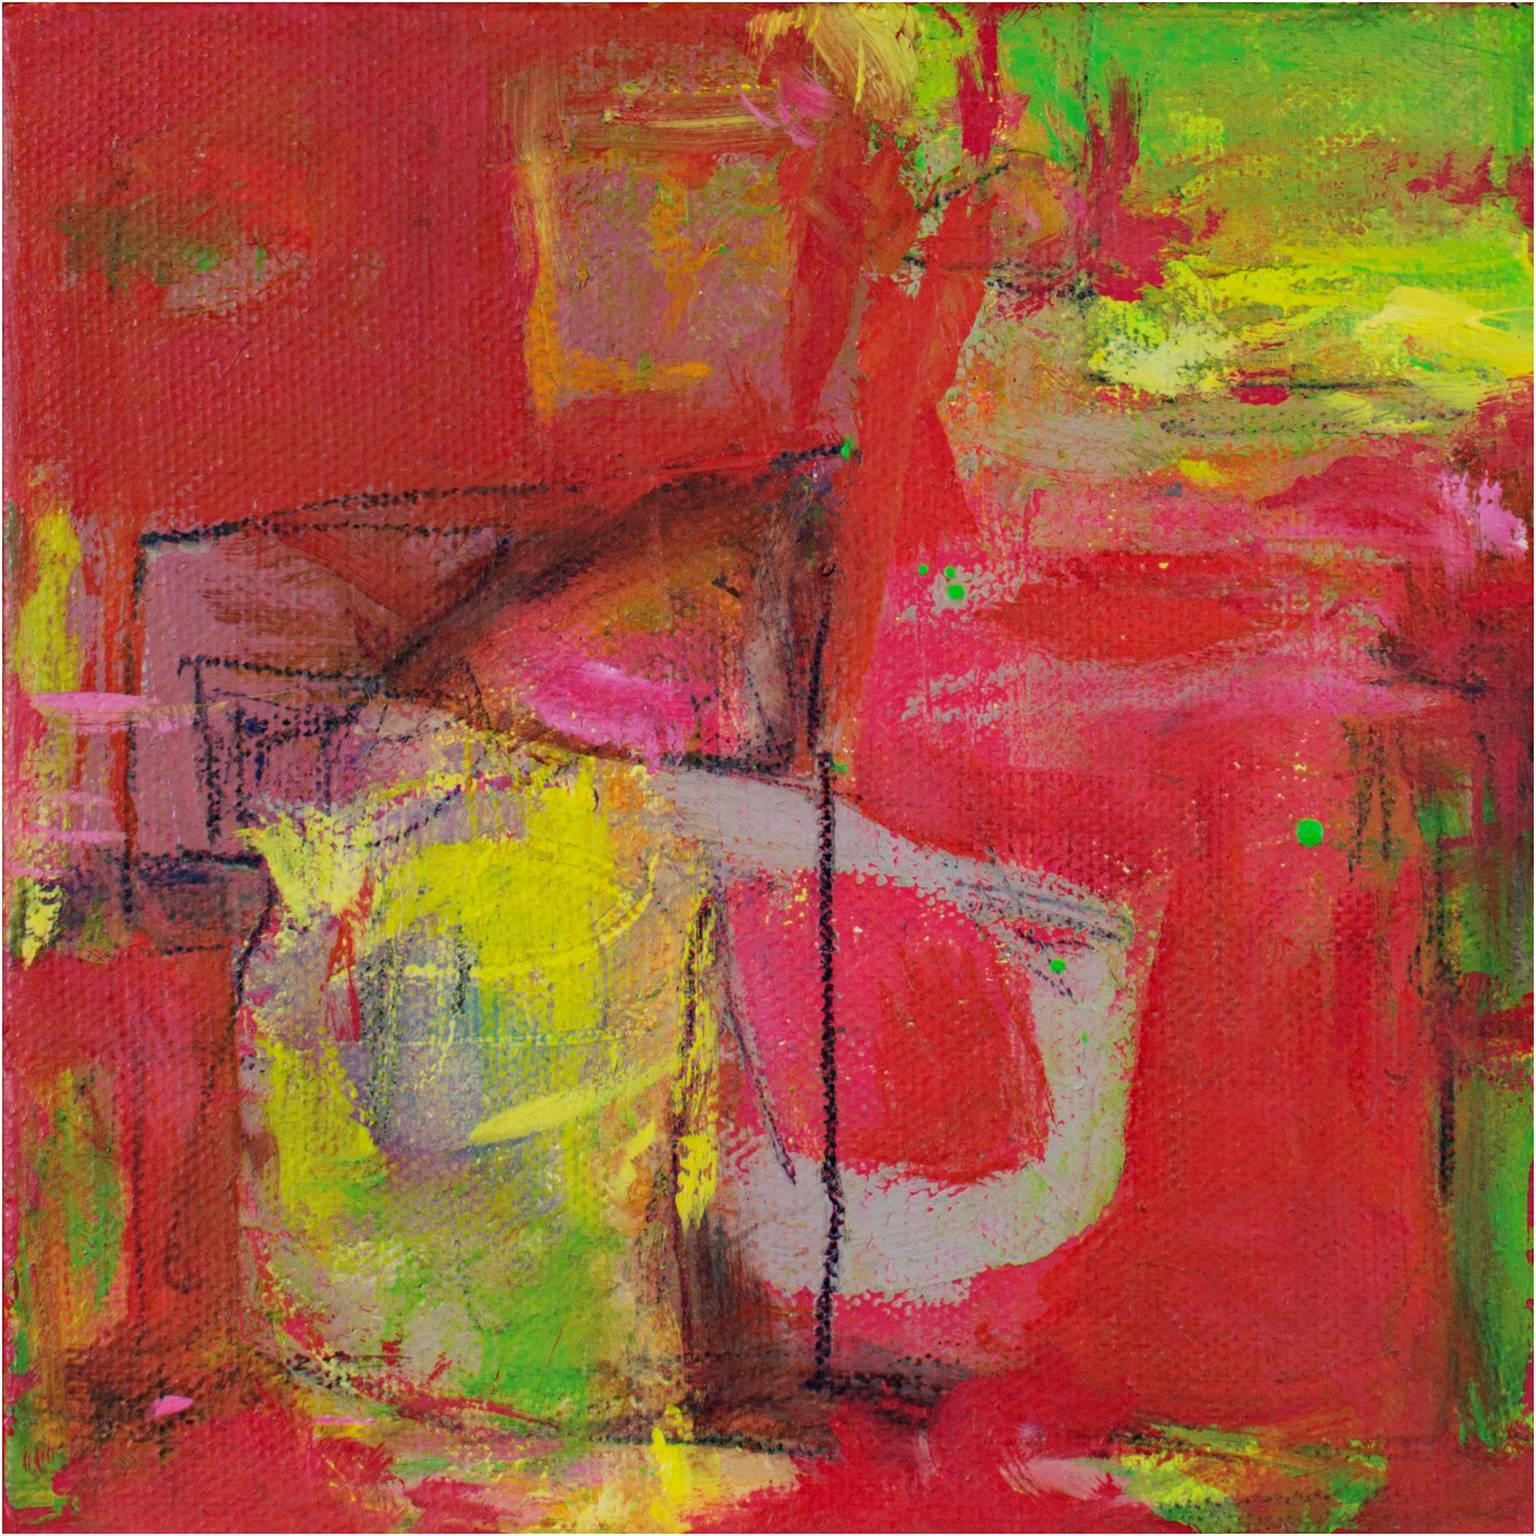 "Jam Session II" is an original oil painting on canvas by Alayna Rose. This painting features a variety of abstract marks in bright green and yellow over a bright pink background. The David Barnett Gallery has the other two paintings in this